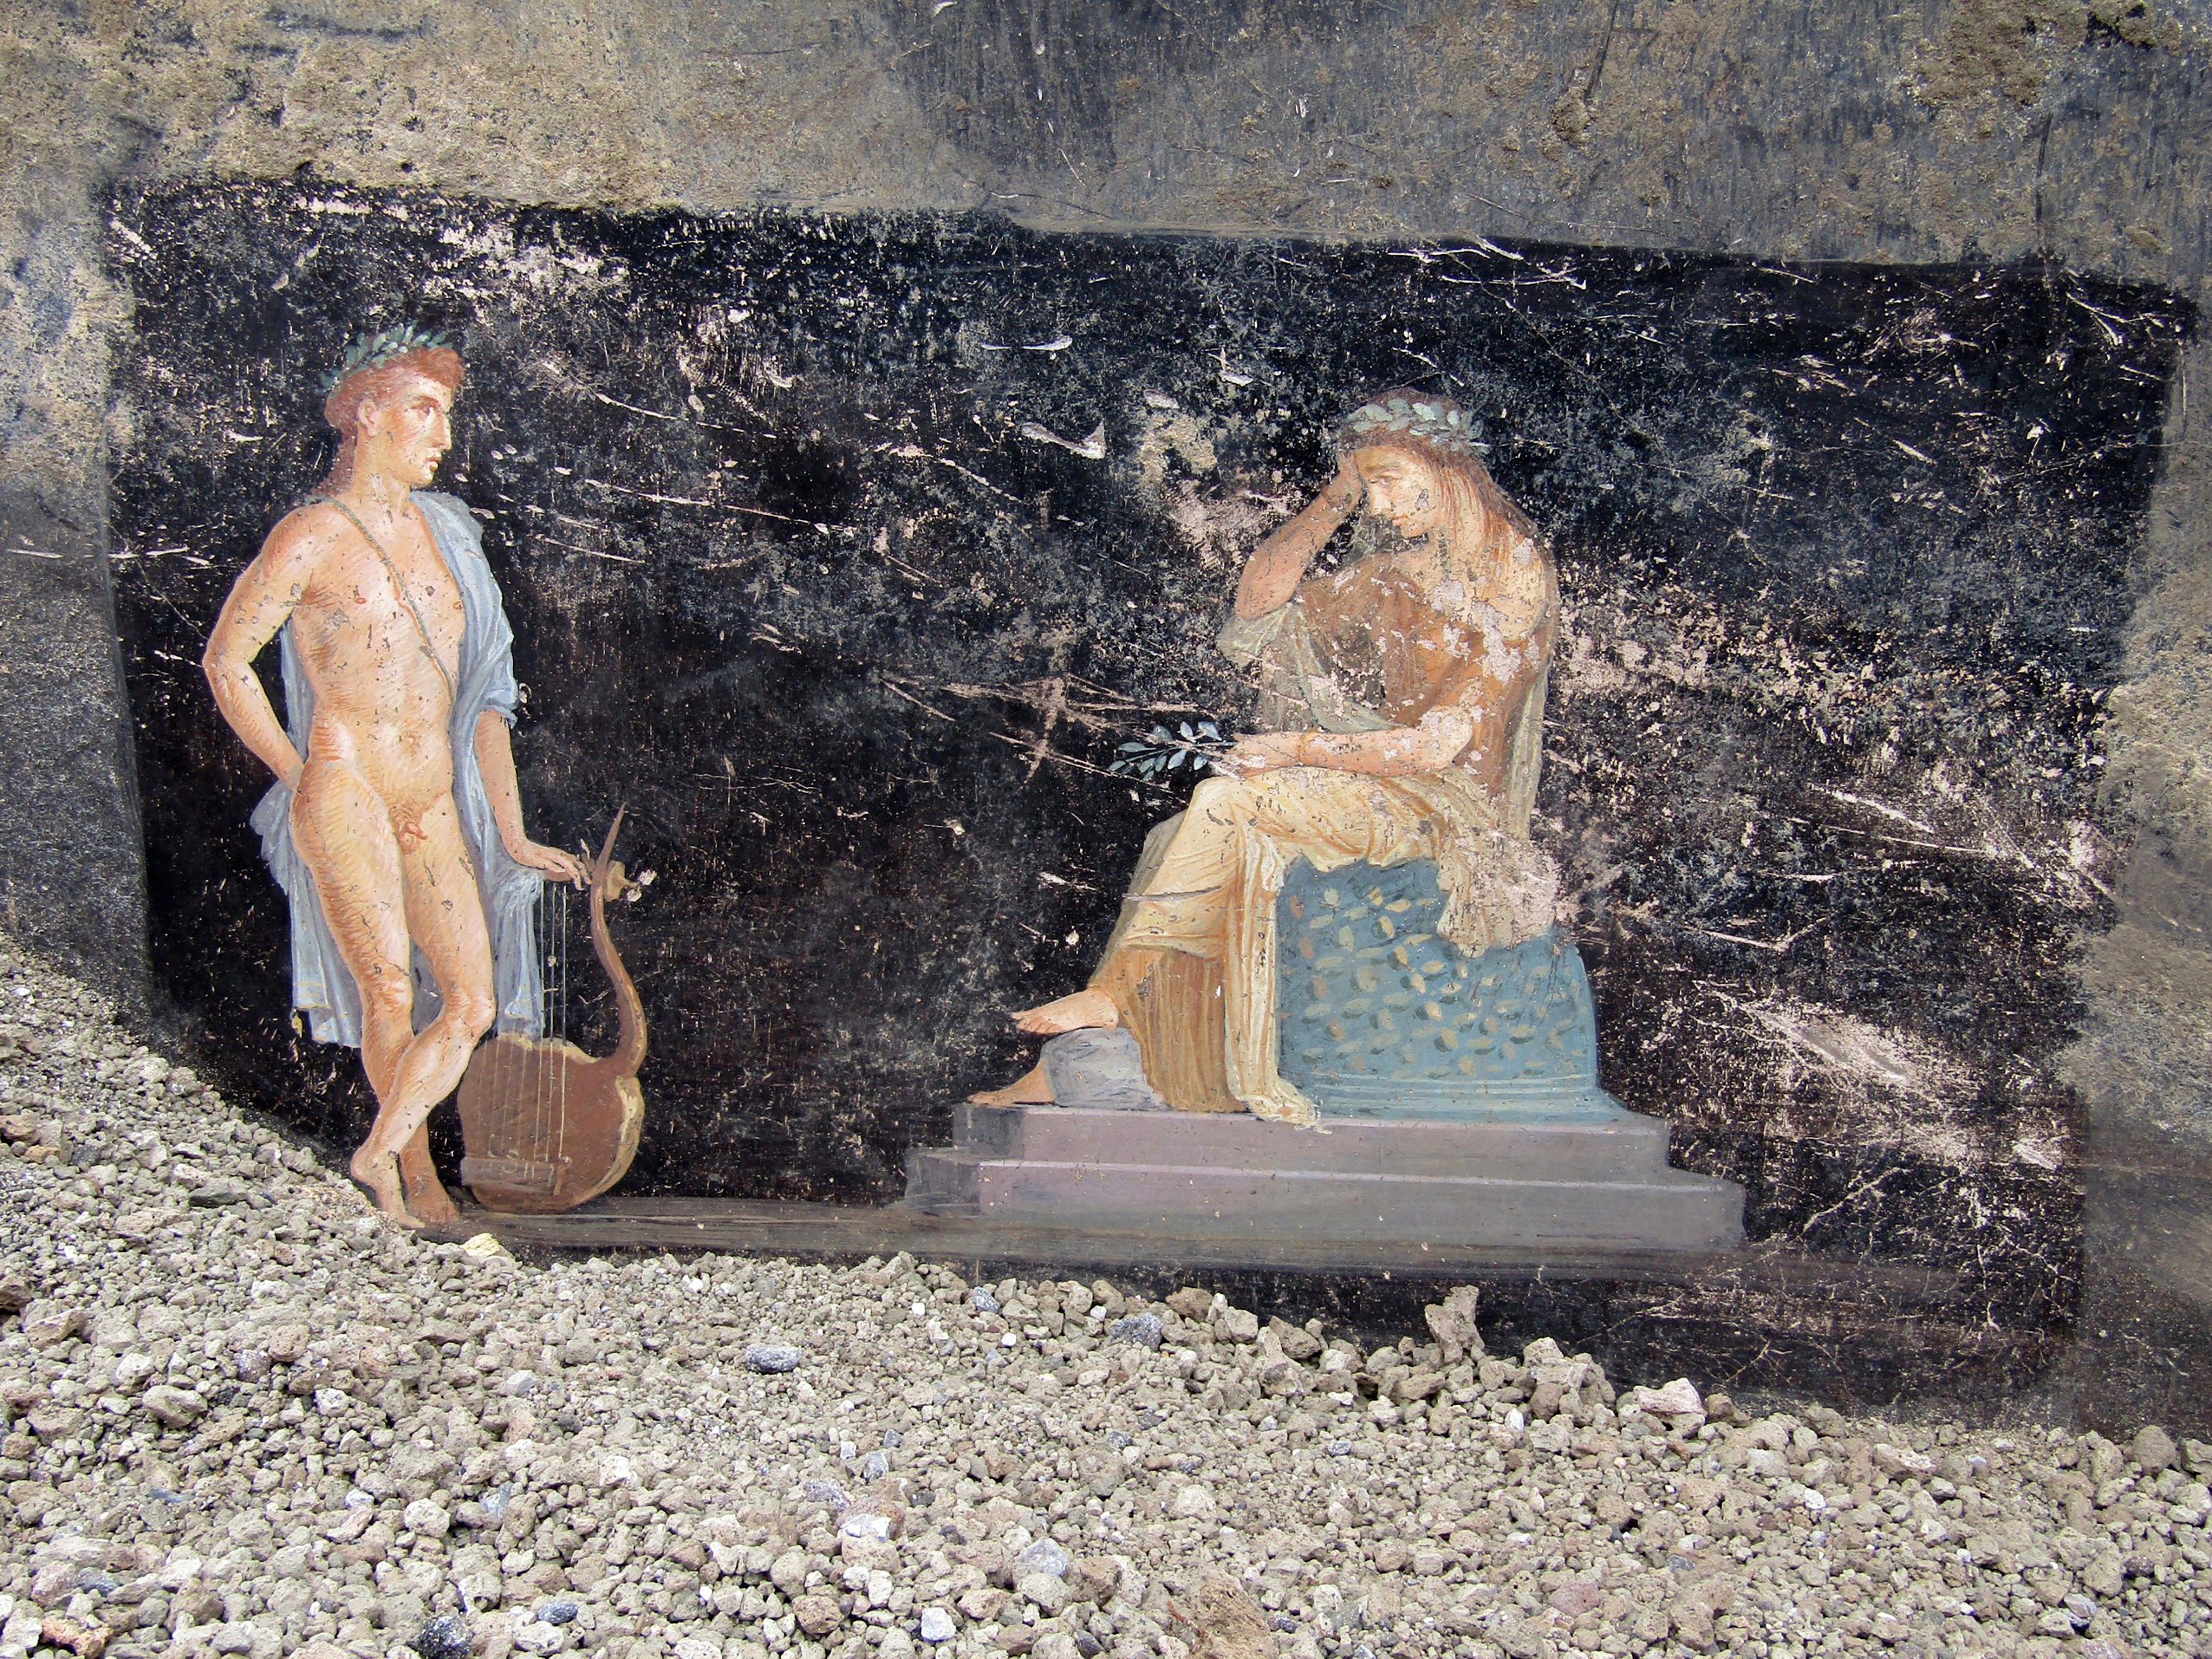 Apollo is depicted on one of the frescos as he attempts to seduce the Trojan priestess Cassandra